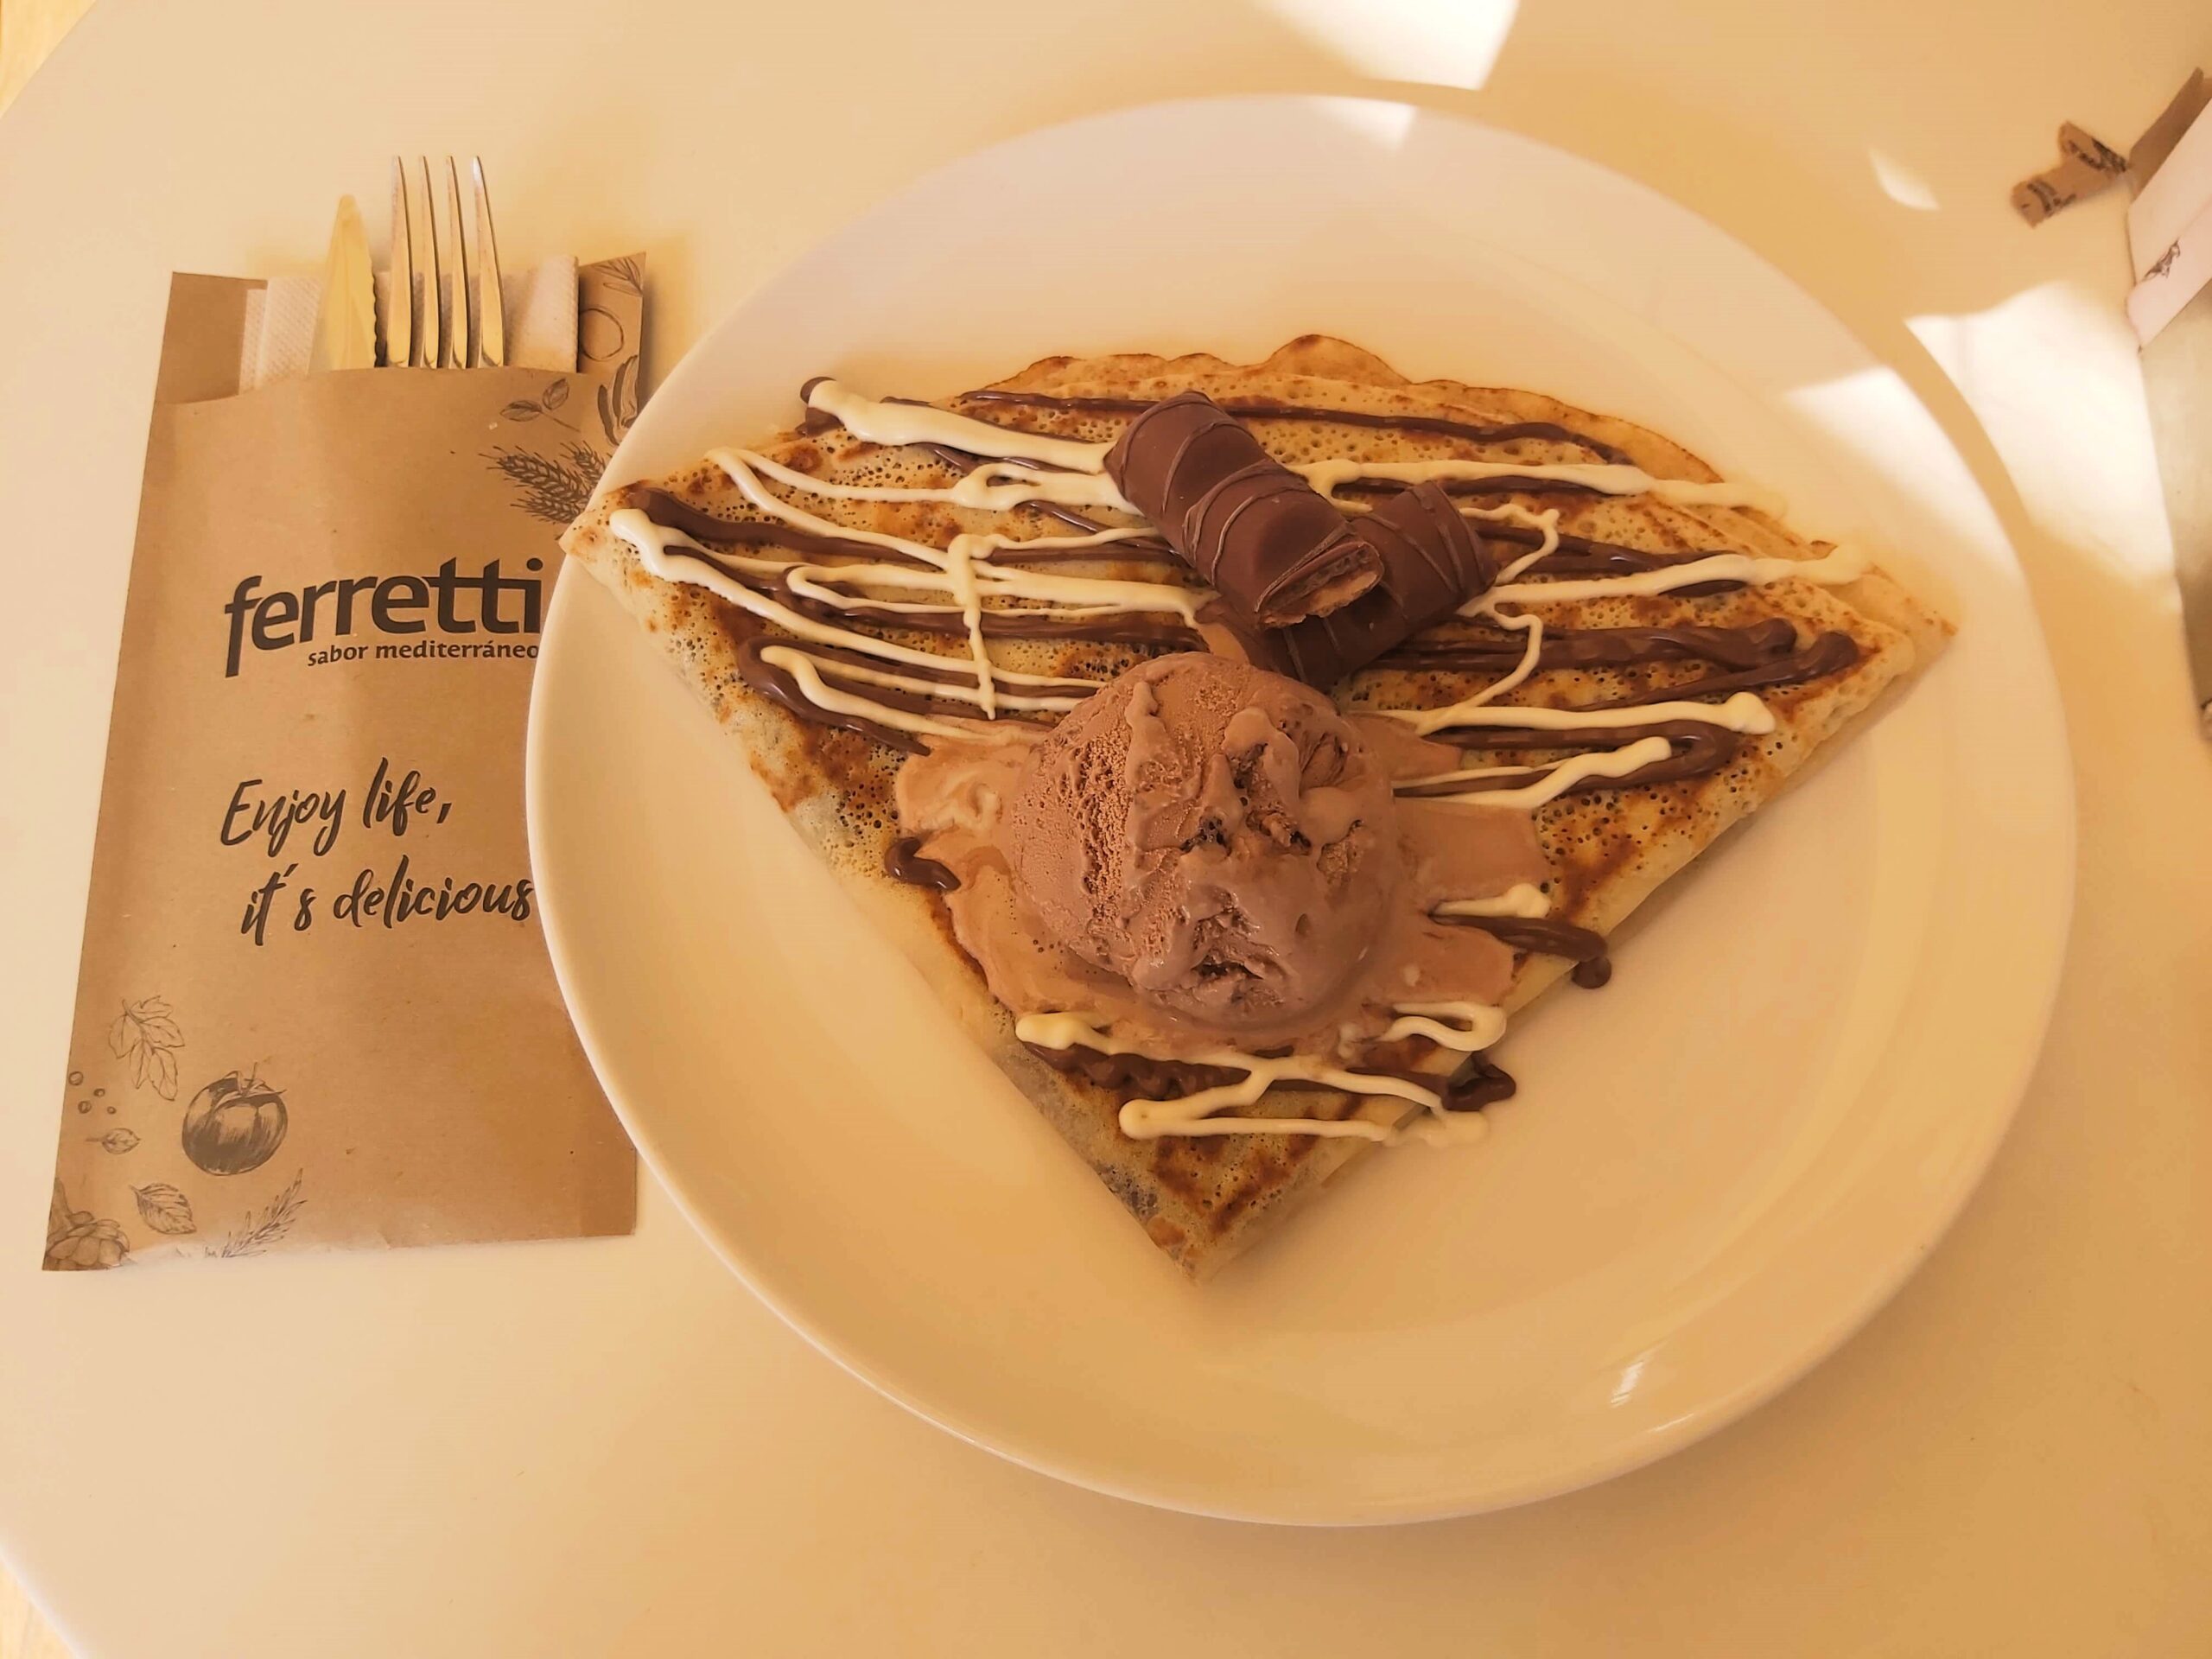 Delicious pancake with Kinder Bueno pieces and chocolate ice cream on top. Ferretti restaurant in Lloret de Mar, Spain.